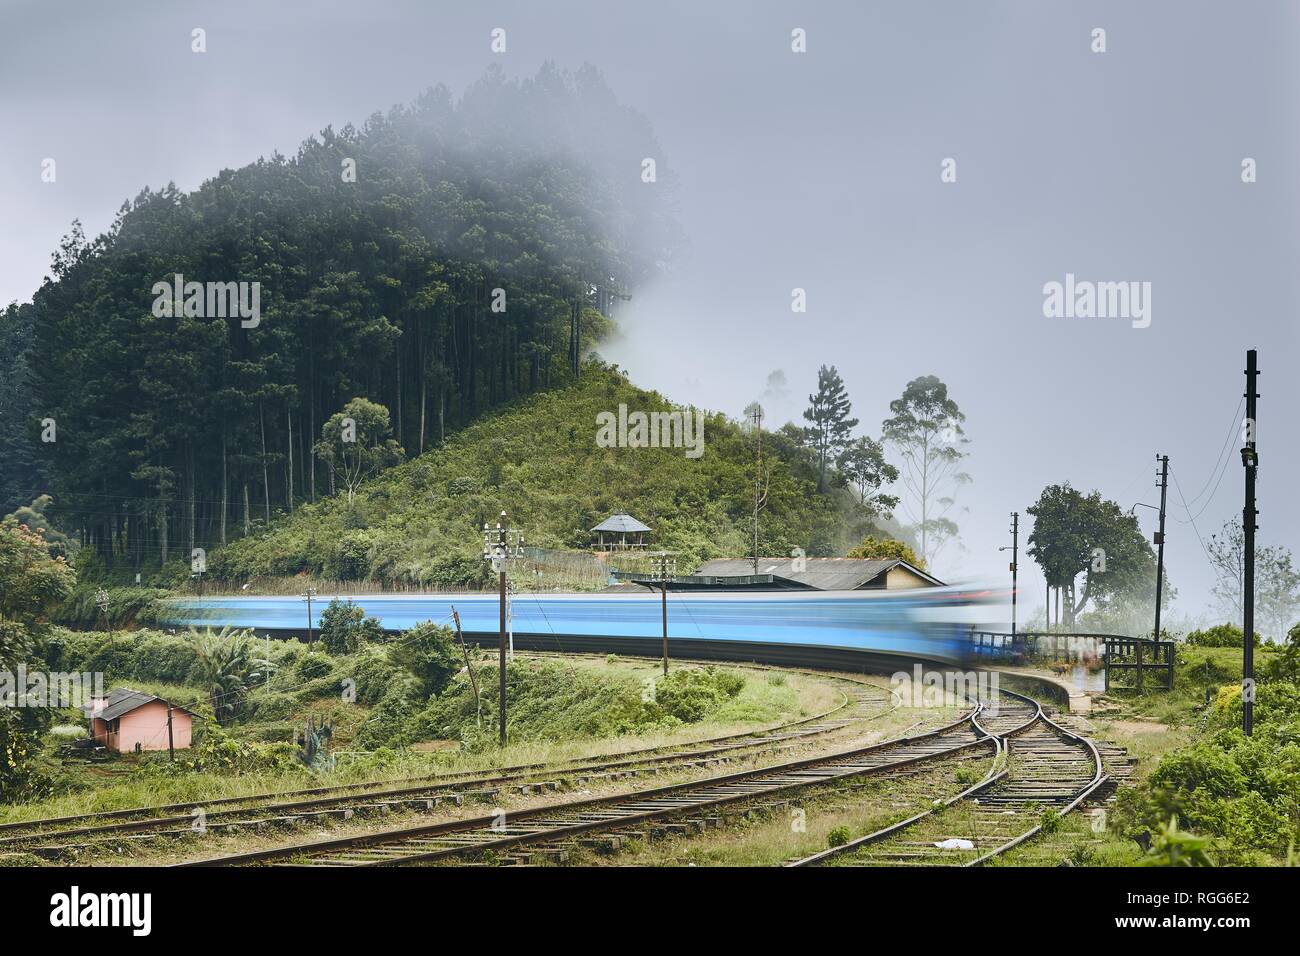 Passenger train on the move in mountains railroad station in Sri Lanka. Stock Photo